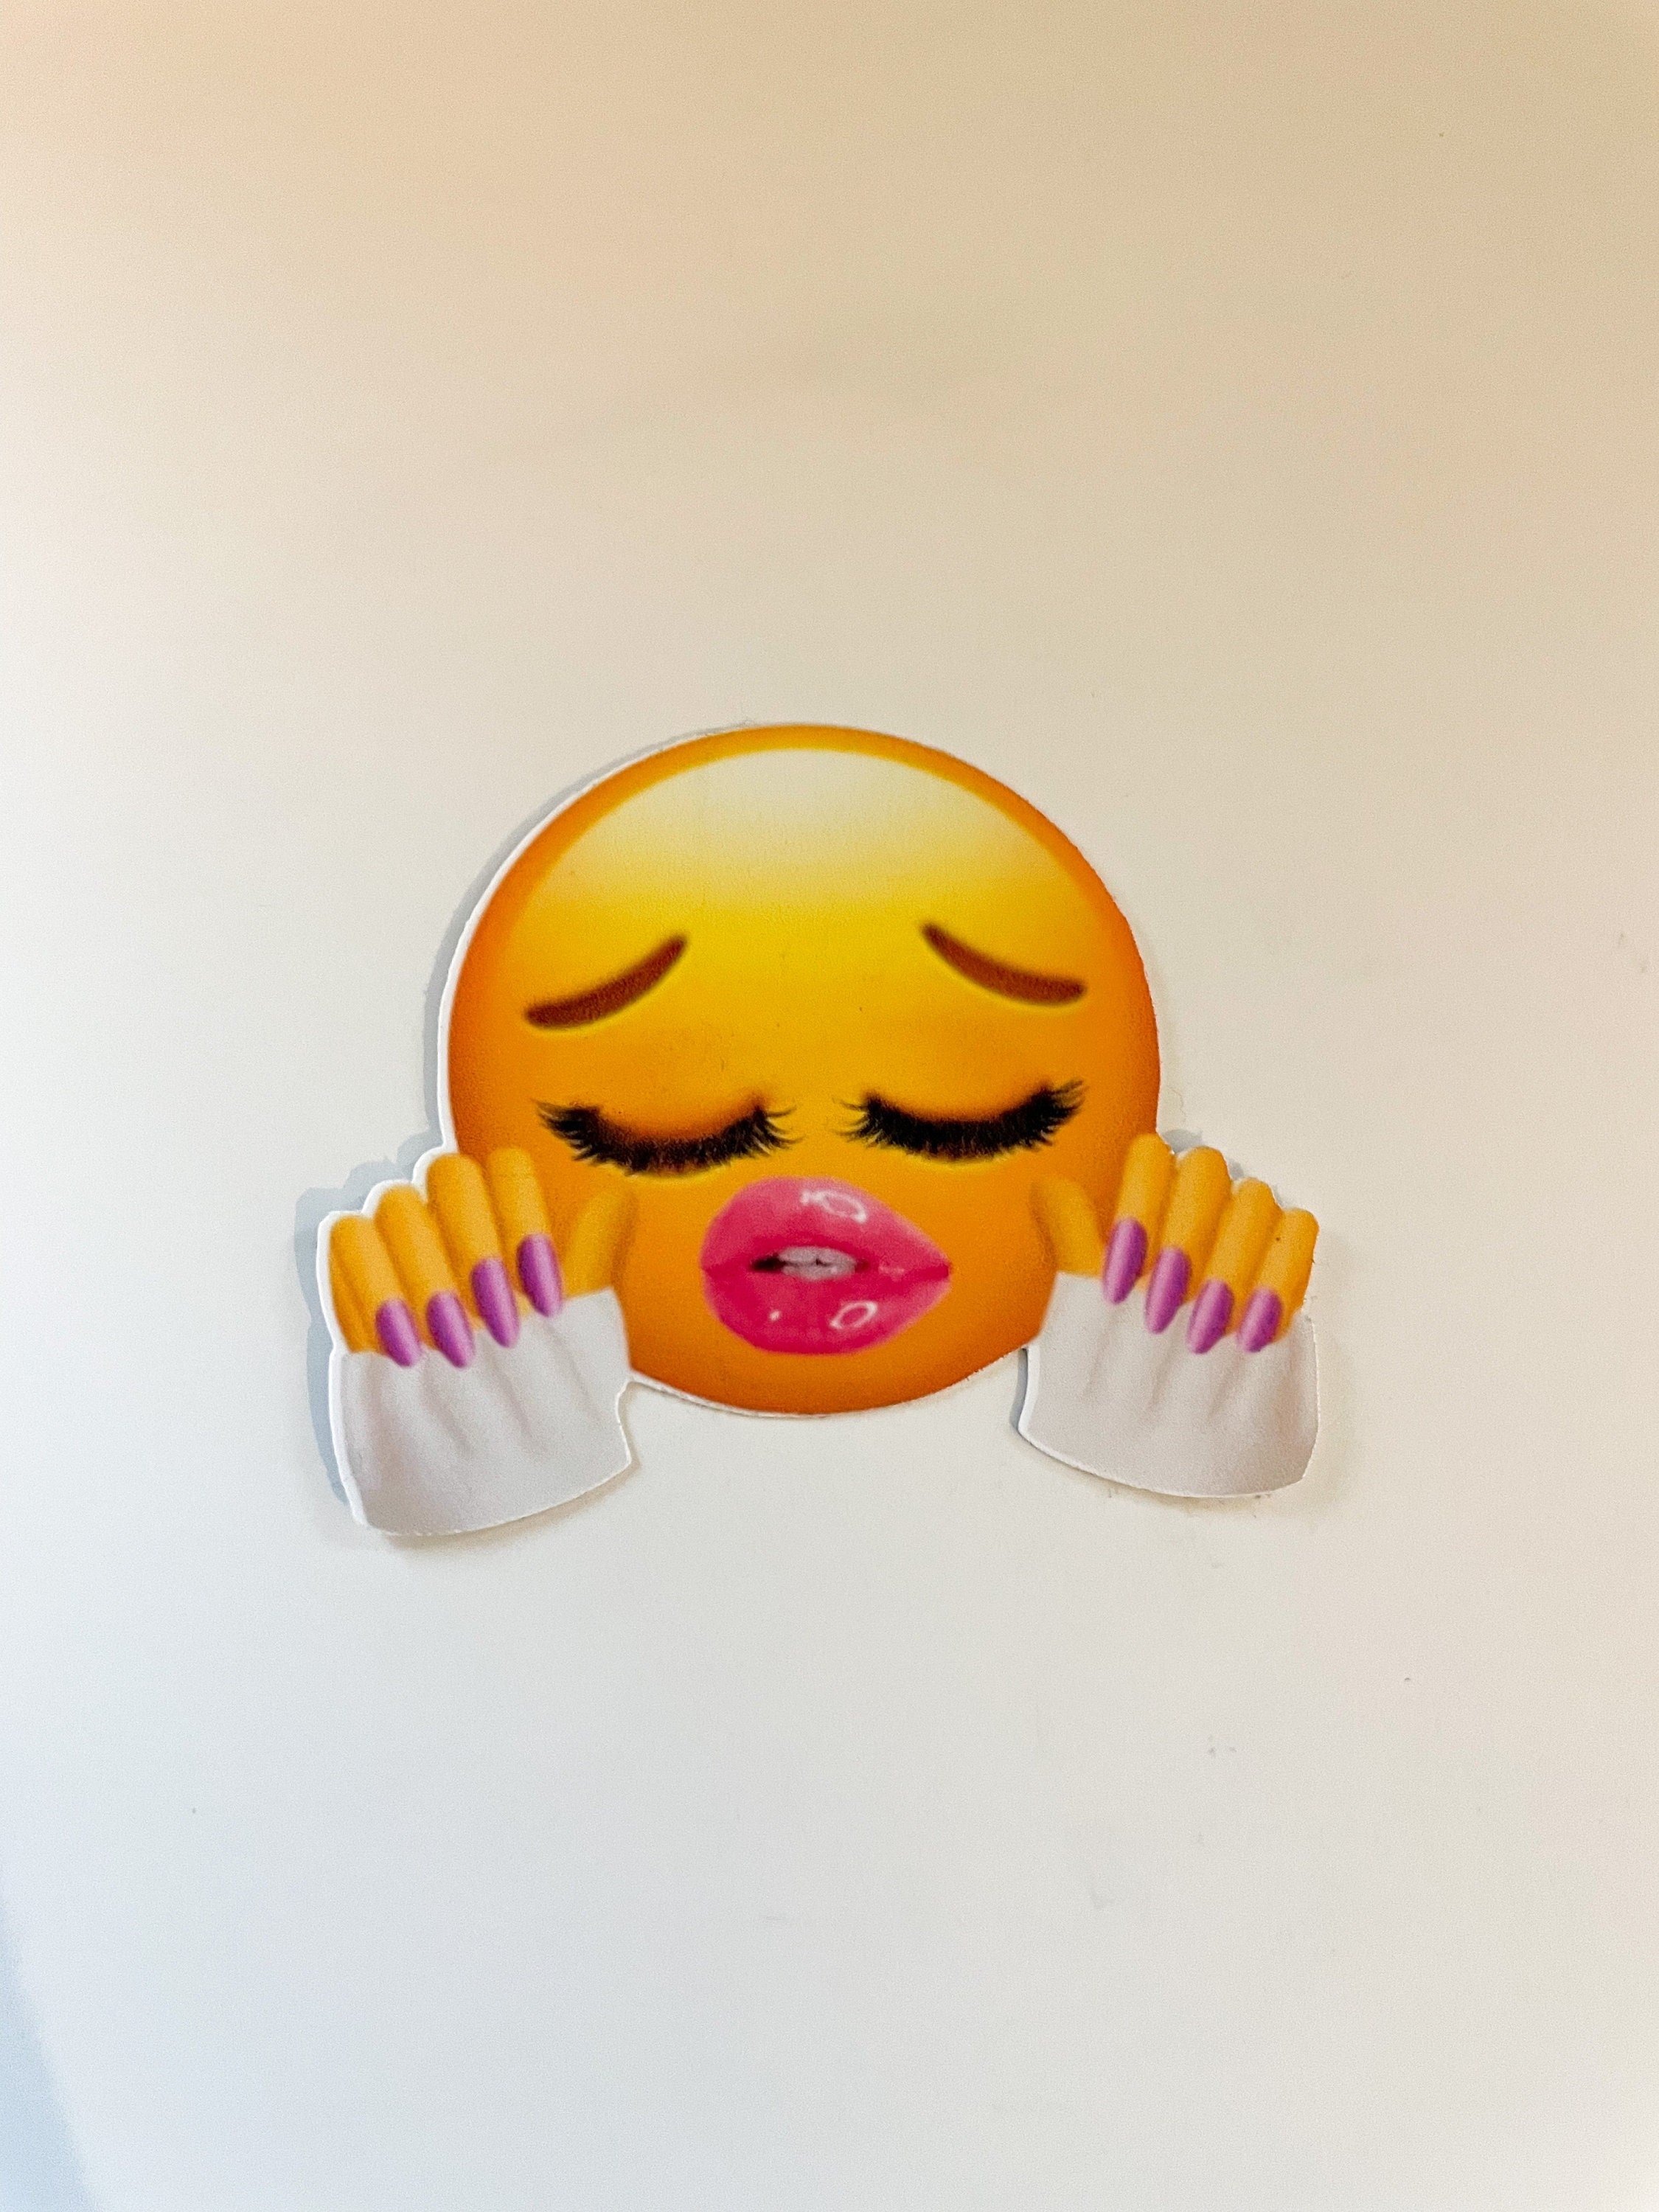 Free download Funny Baddie Nails and Lips Emoji Sticker Decal Etsy Norway [2250x3000] for your Desktop, Mobile & Tablet. Explore 2022 Baddie Wallpaper